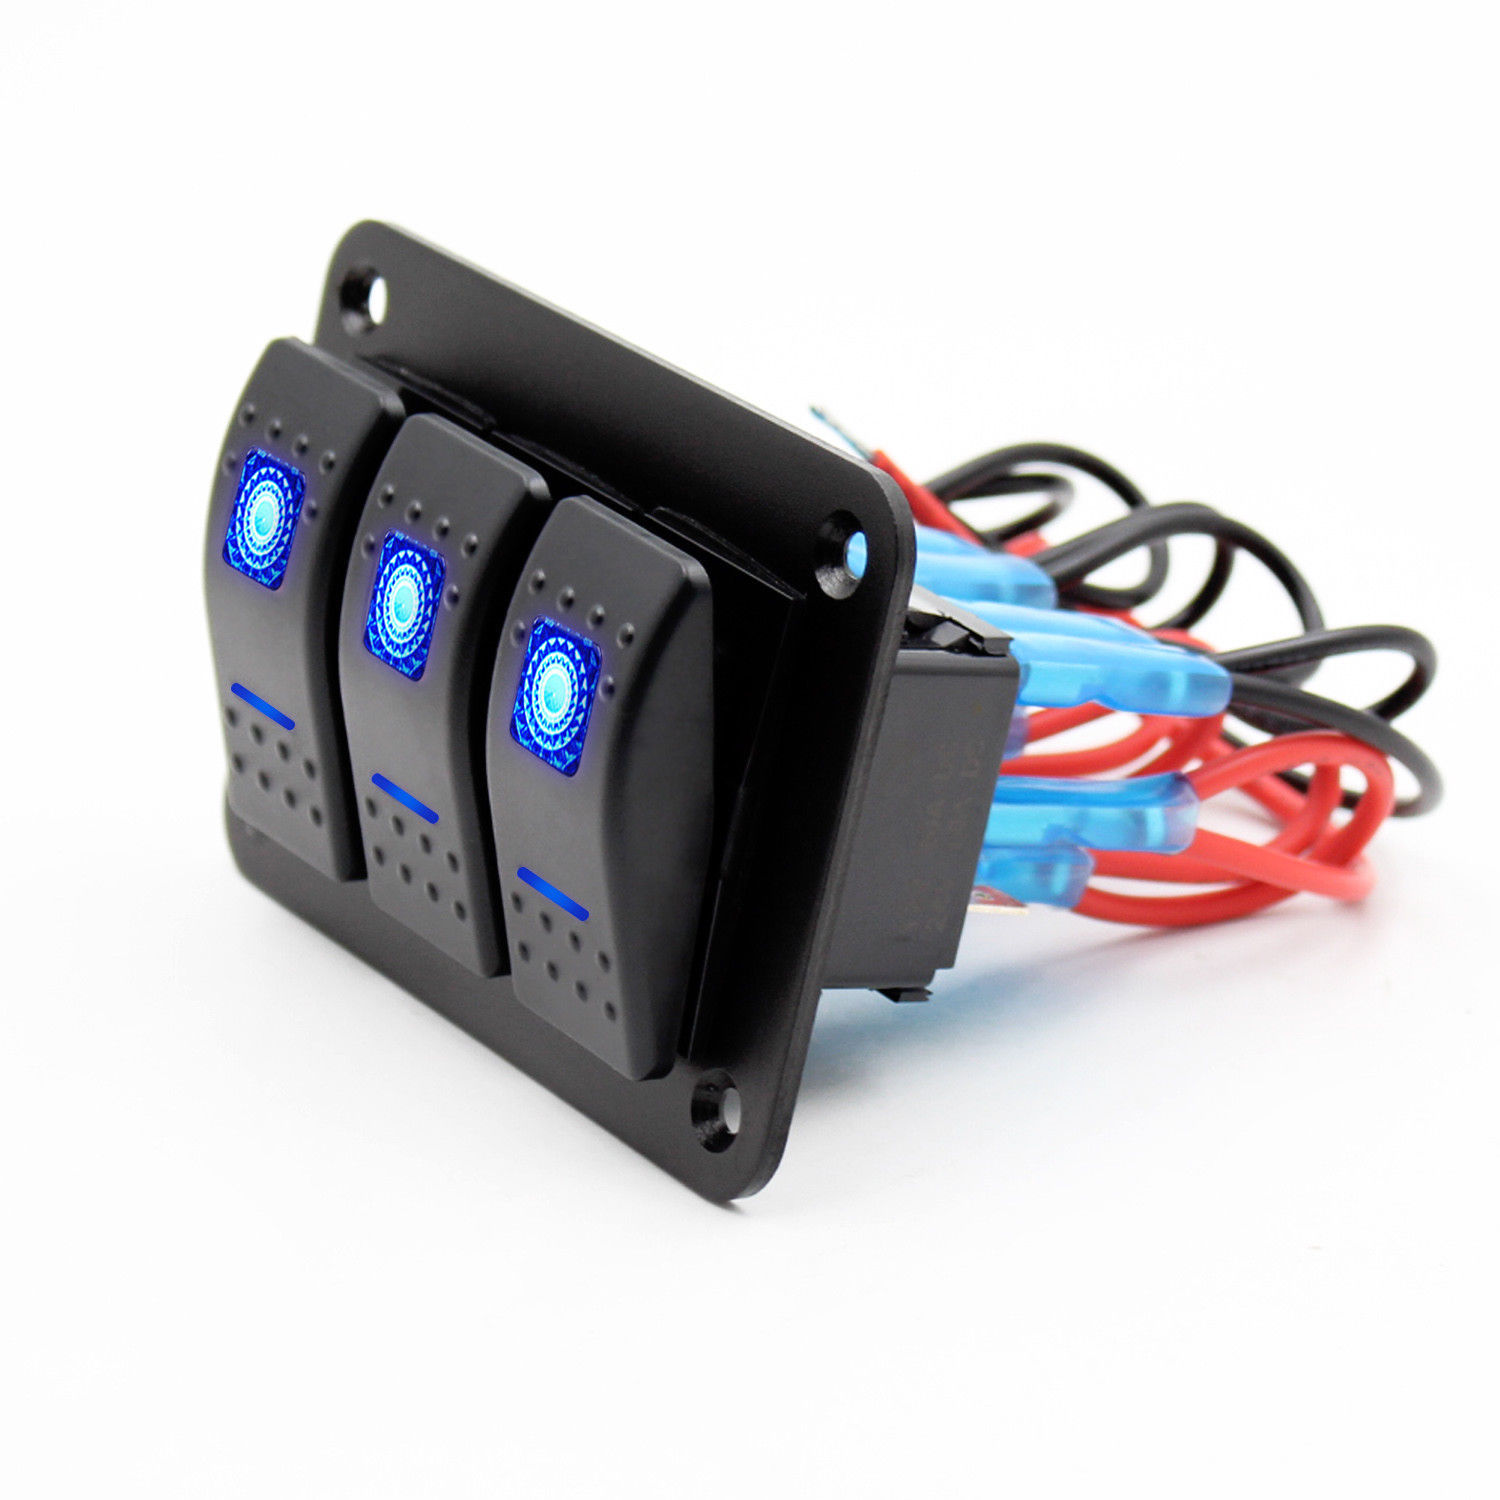 3 Gang SPST 20A 5Pin ON Off 4 Rocker Pre-Wired Automotive Waterproof Aluminum RedGreenBlue LED Car Switch Control Panel 12V (2)